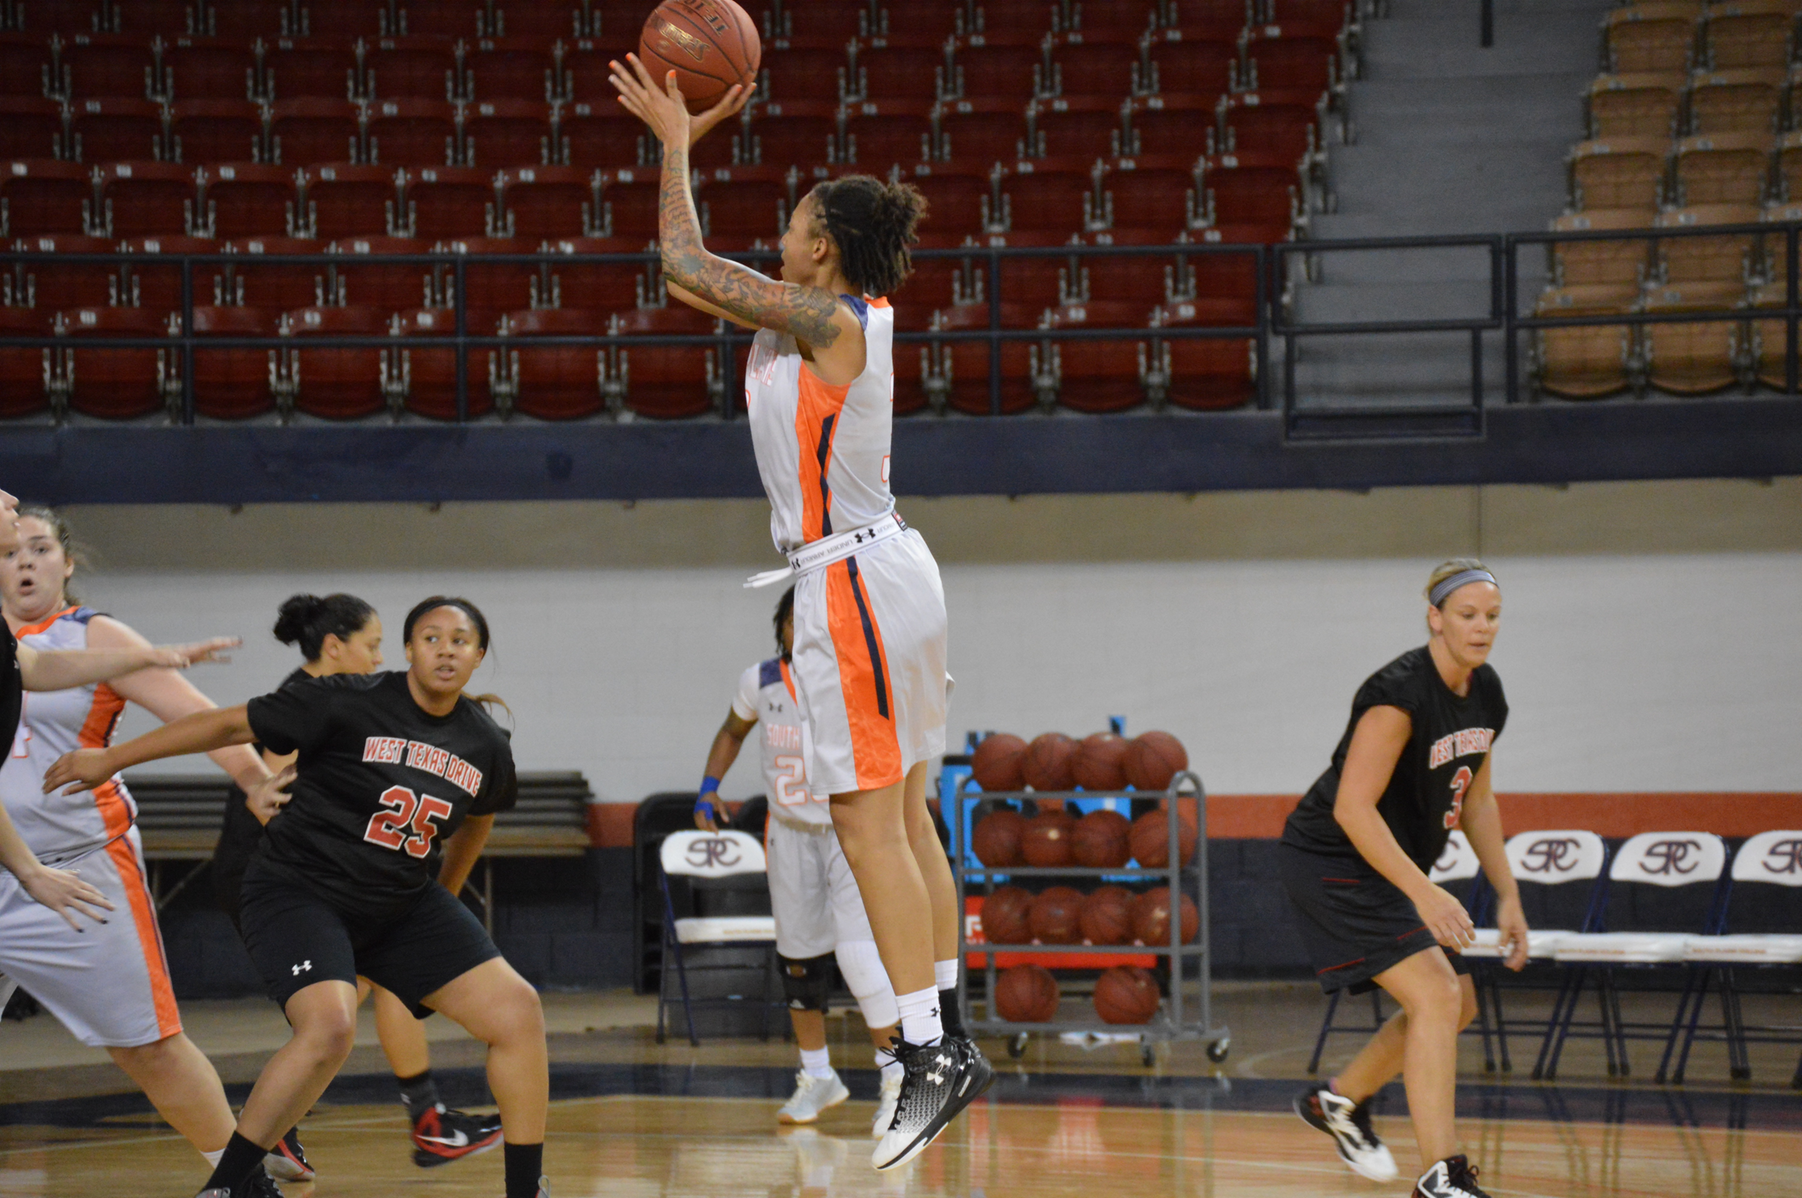 Lady Texans fall to West Texas Drive Wednesday night